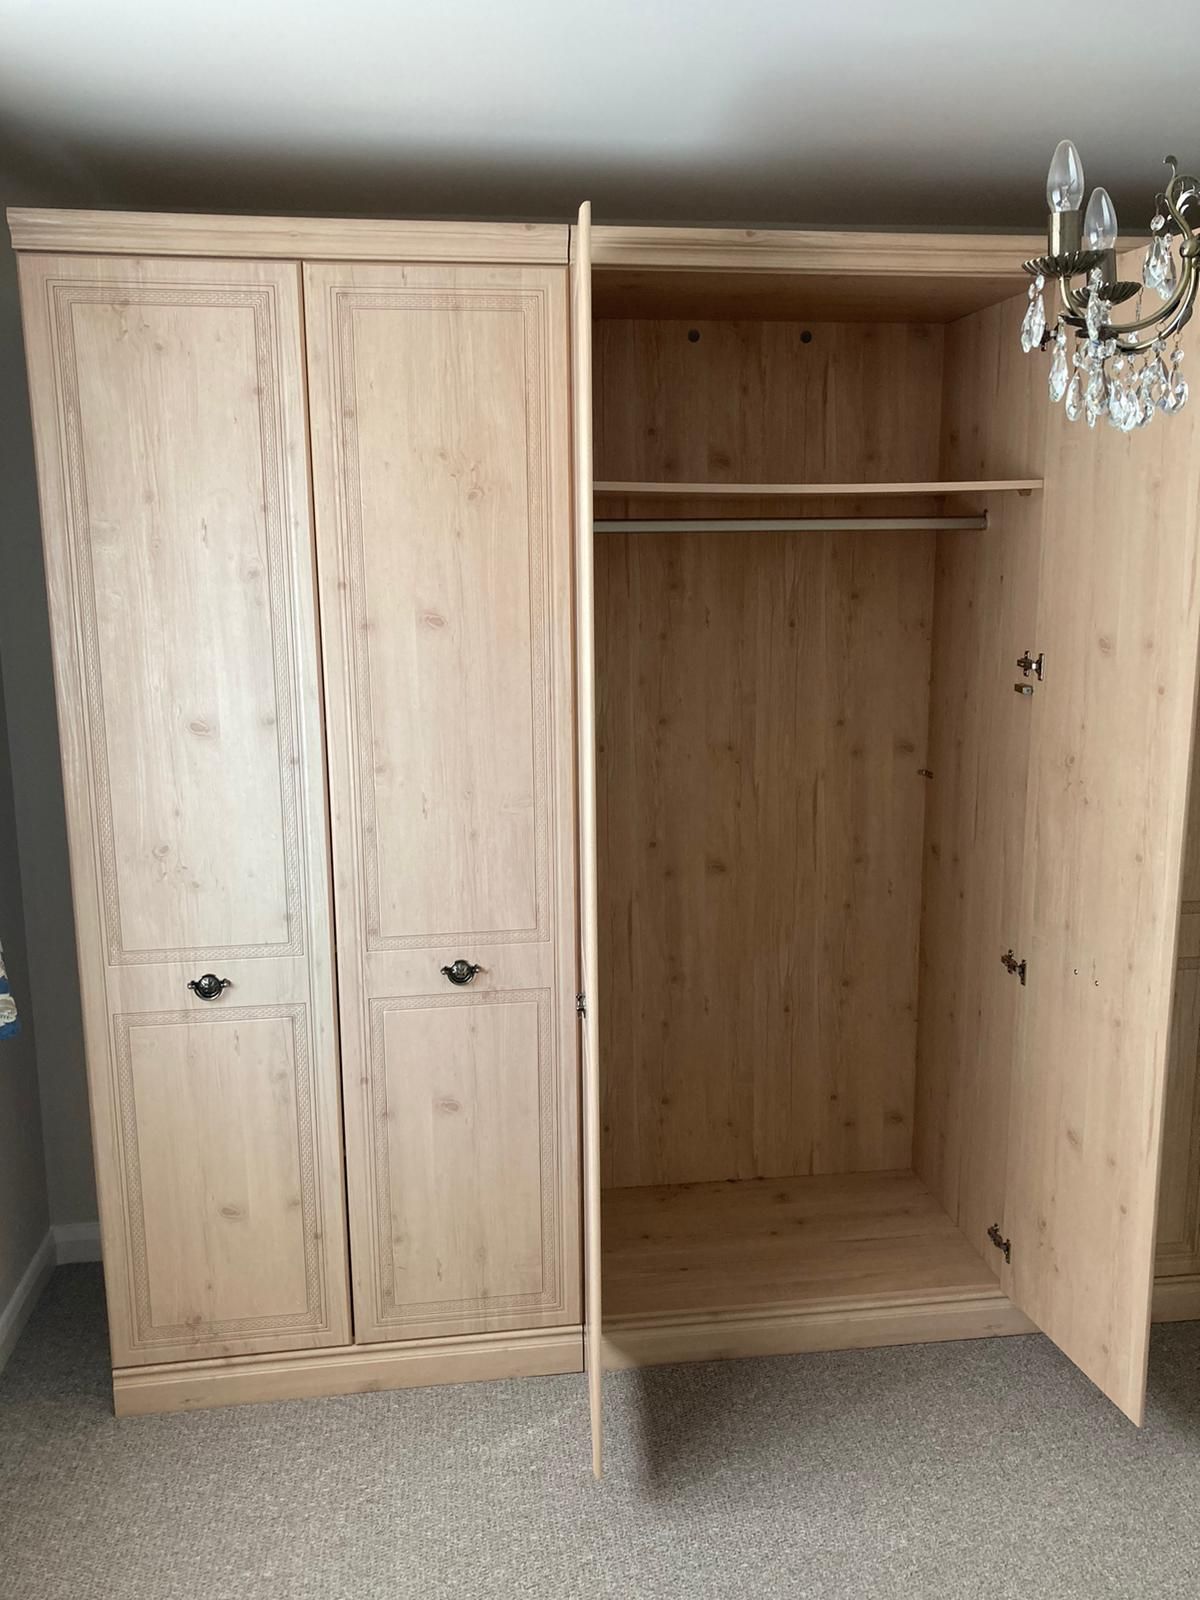 AN ALSTONS BEDROOM SUITE, comprising a five door wardrobe, approximate width 230cm (not assembled in - Image 2 of 7